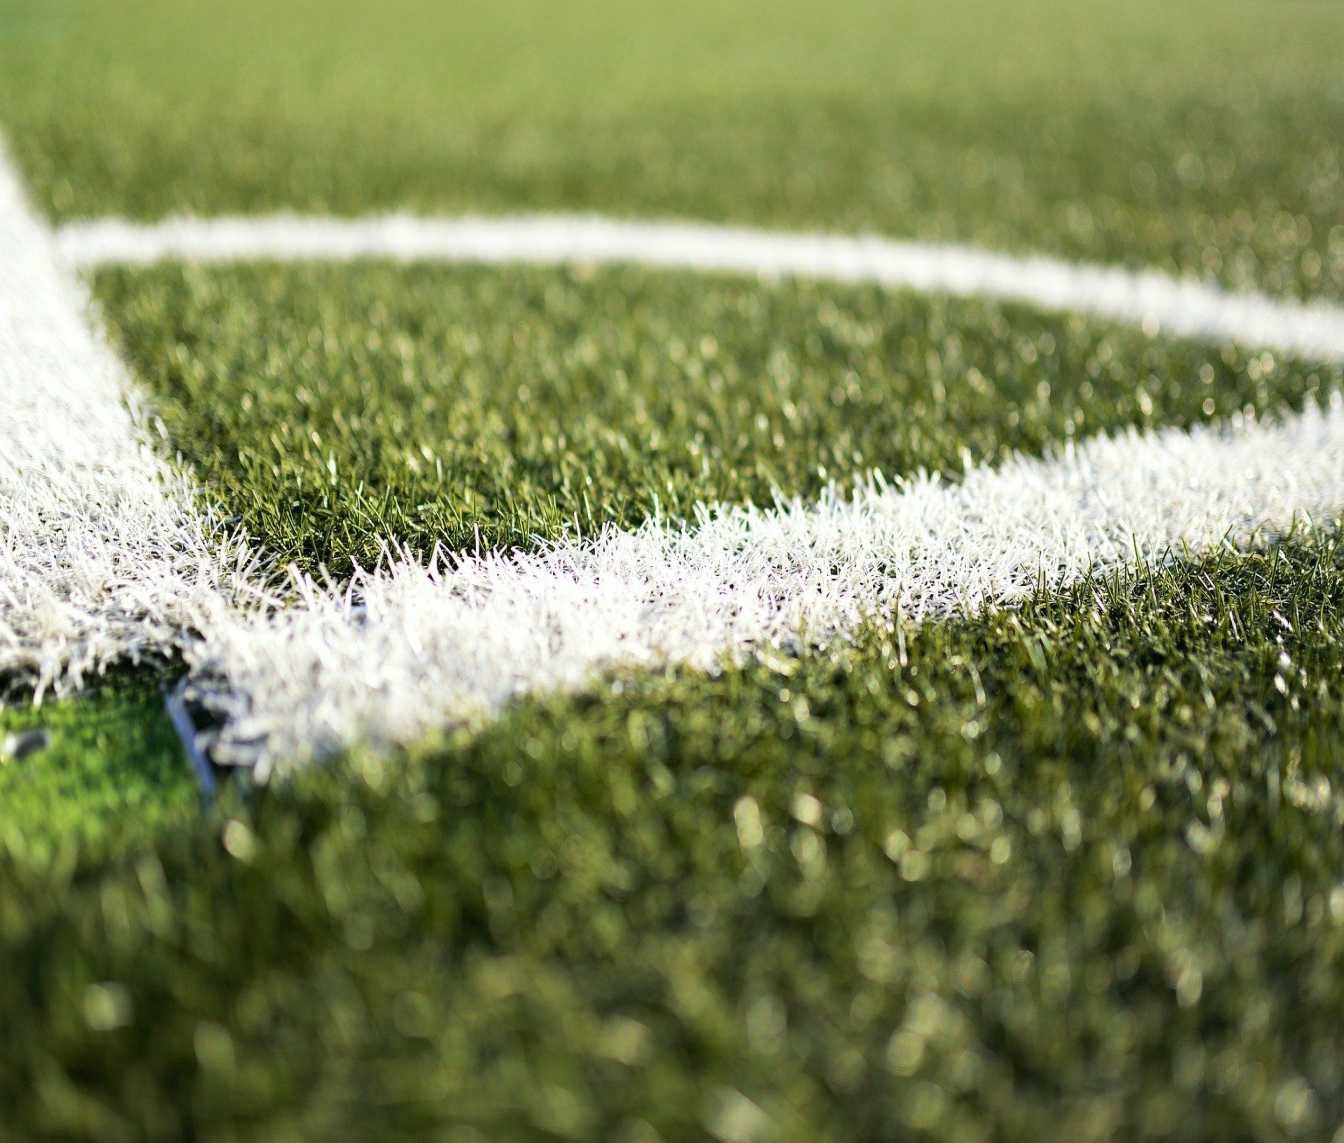 Close-up of a synthetic grass soccer field in Maricopa AZ, focused on the white lines marking a corner of the pitch. The texture of the artificial turf and the precise maintenance by Maricopa Turf Pros are evident. The background is slightly blurred to emphasize the markings.